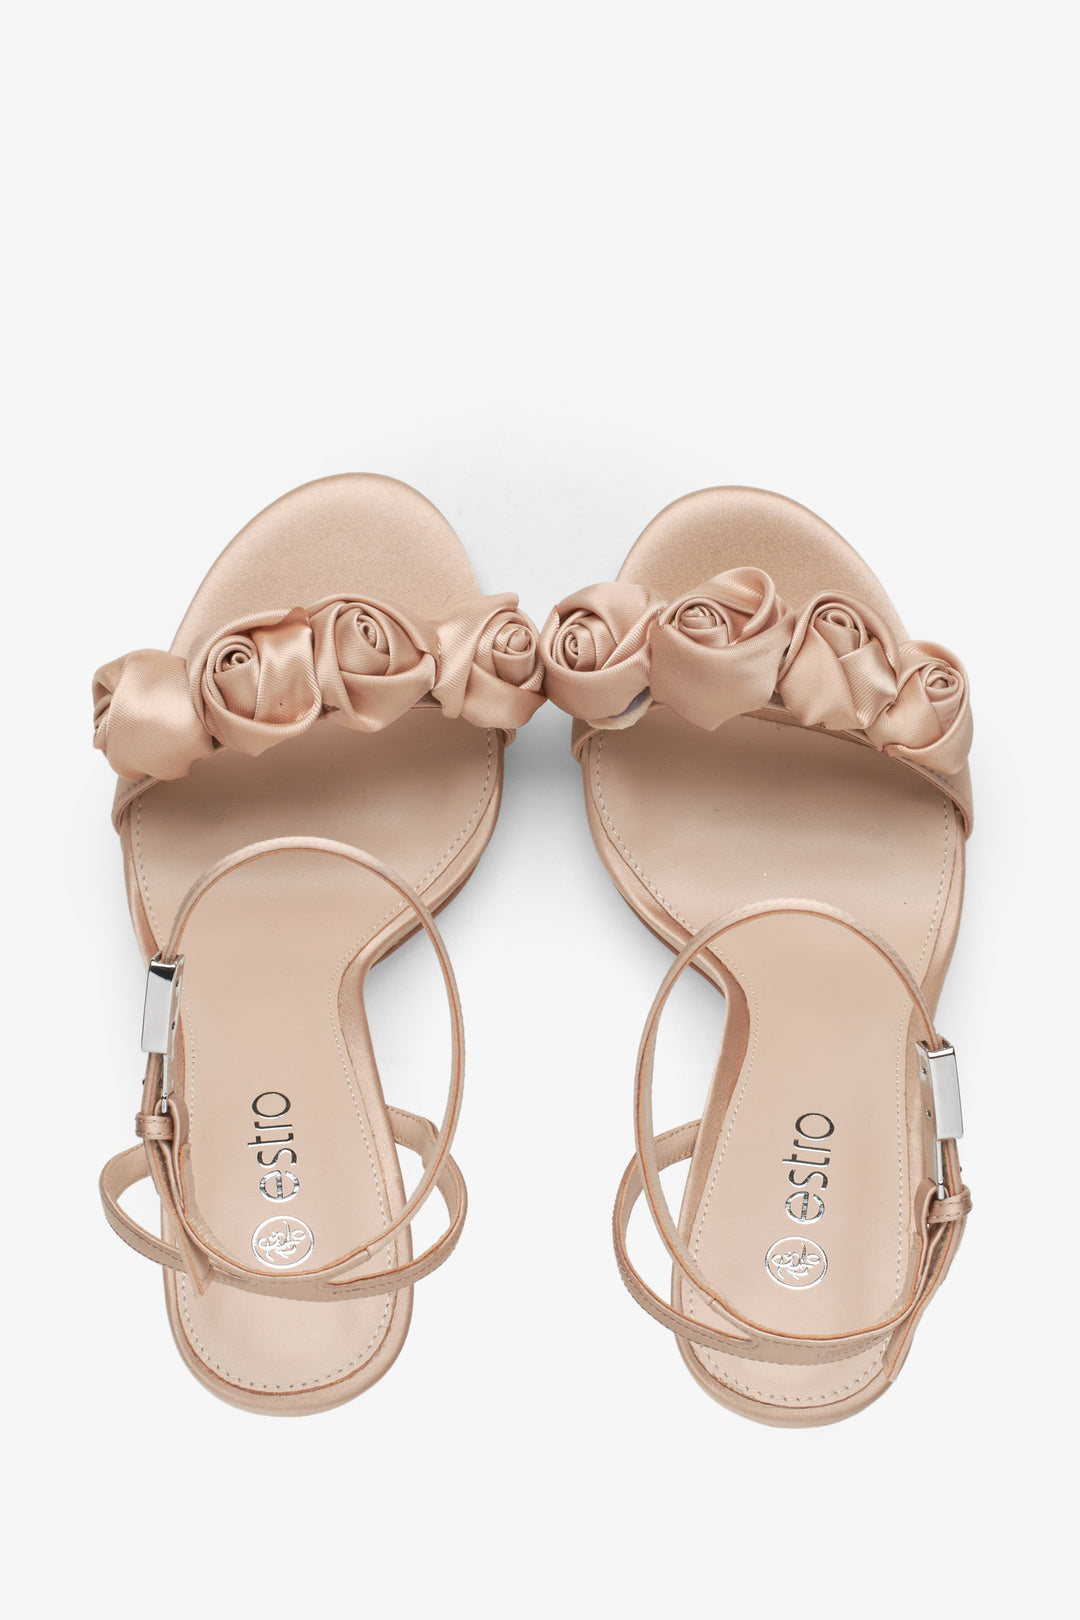 Women's beige sandals with floral ornamented heels - top view presentation.